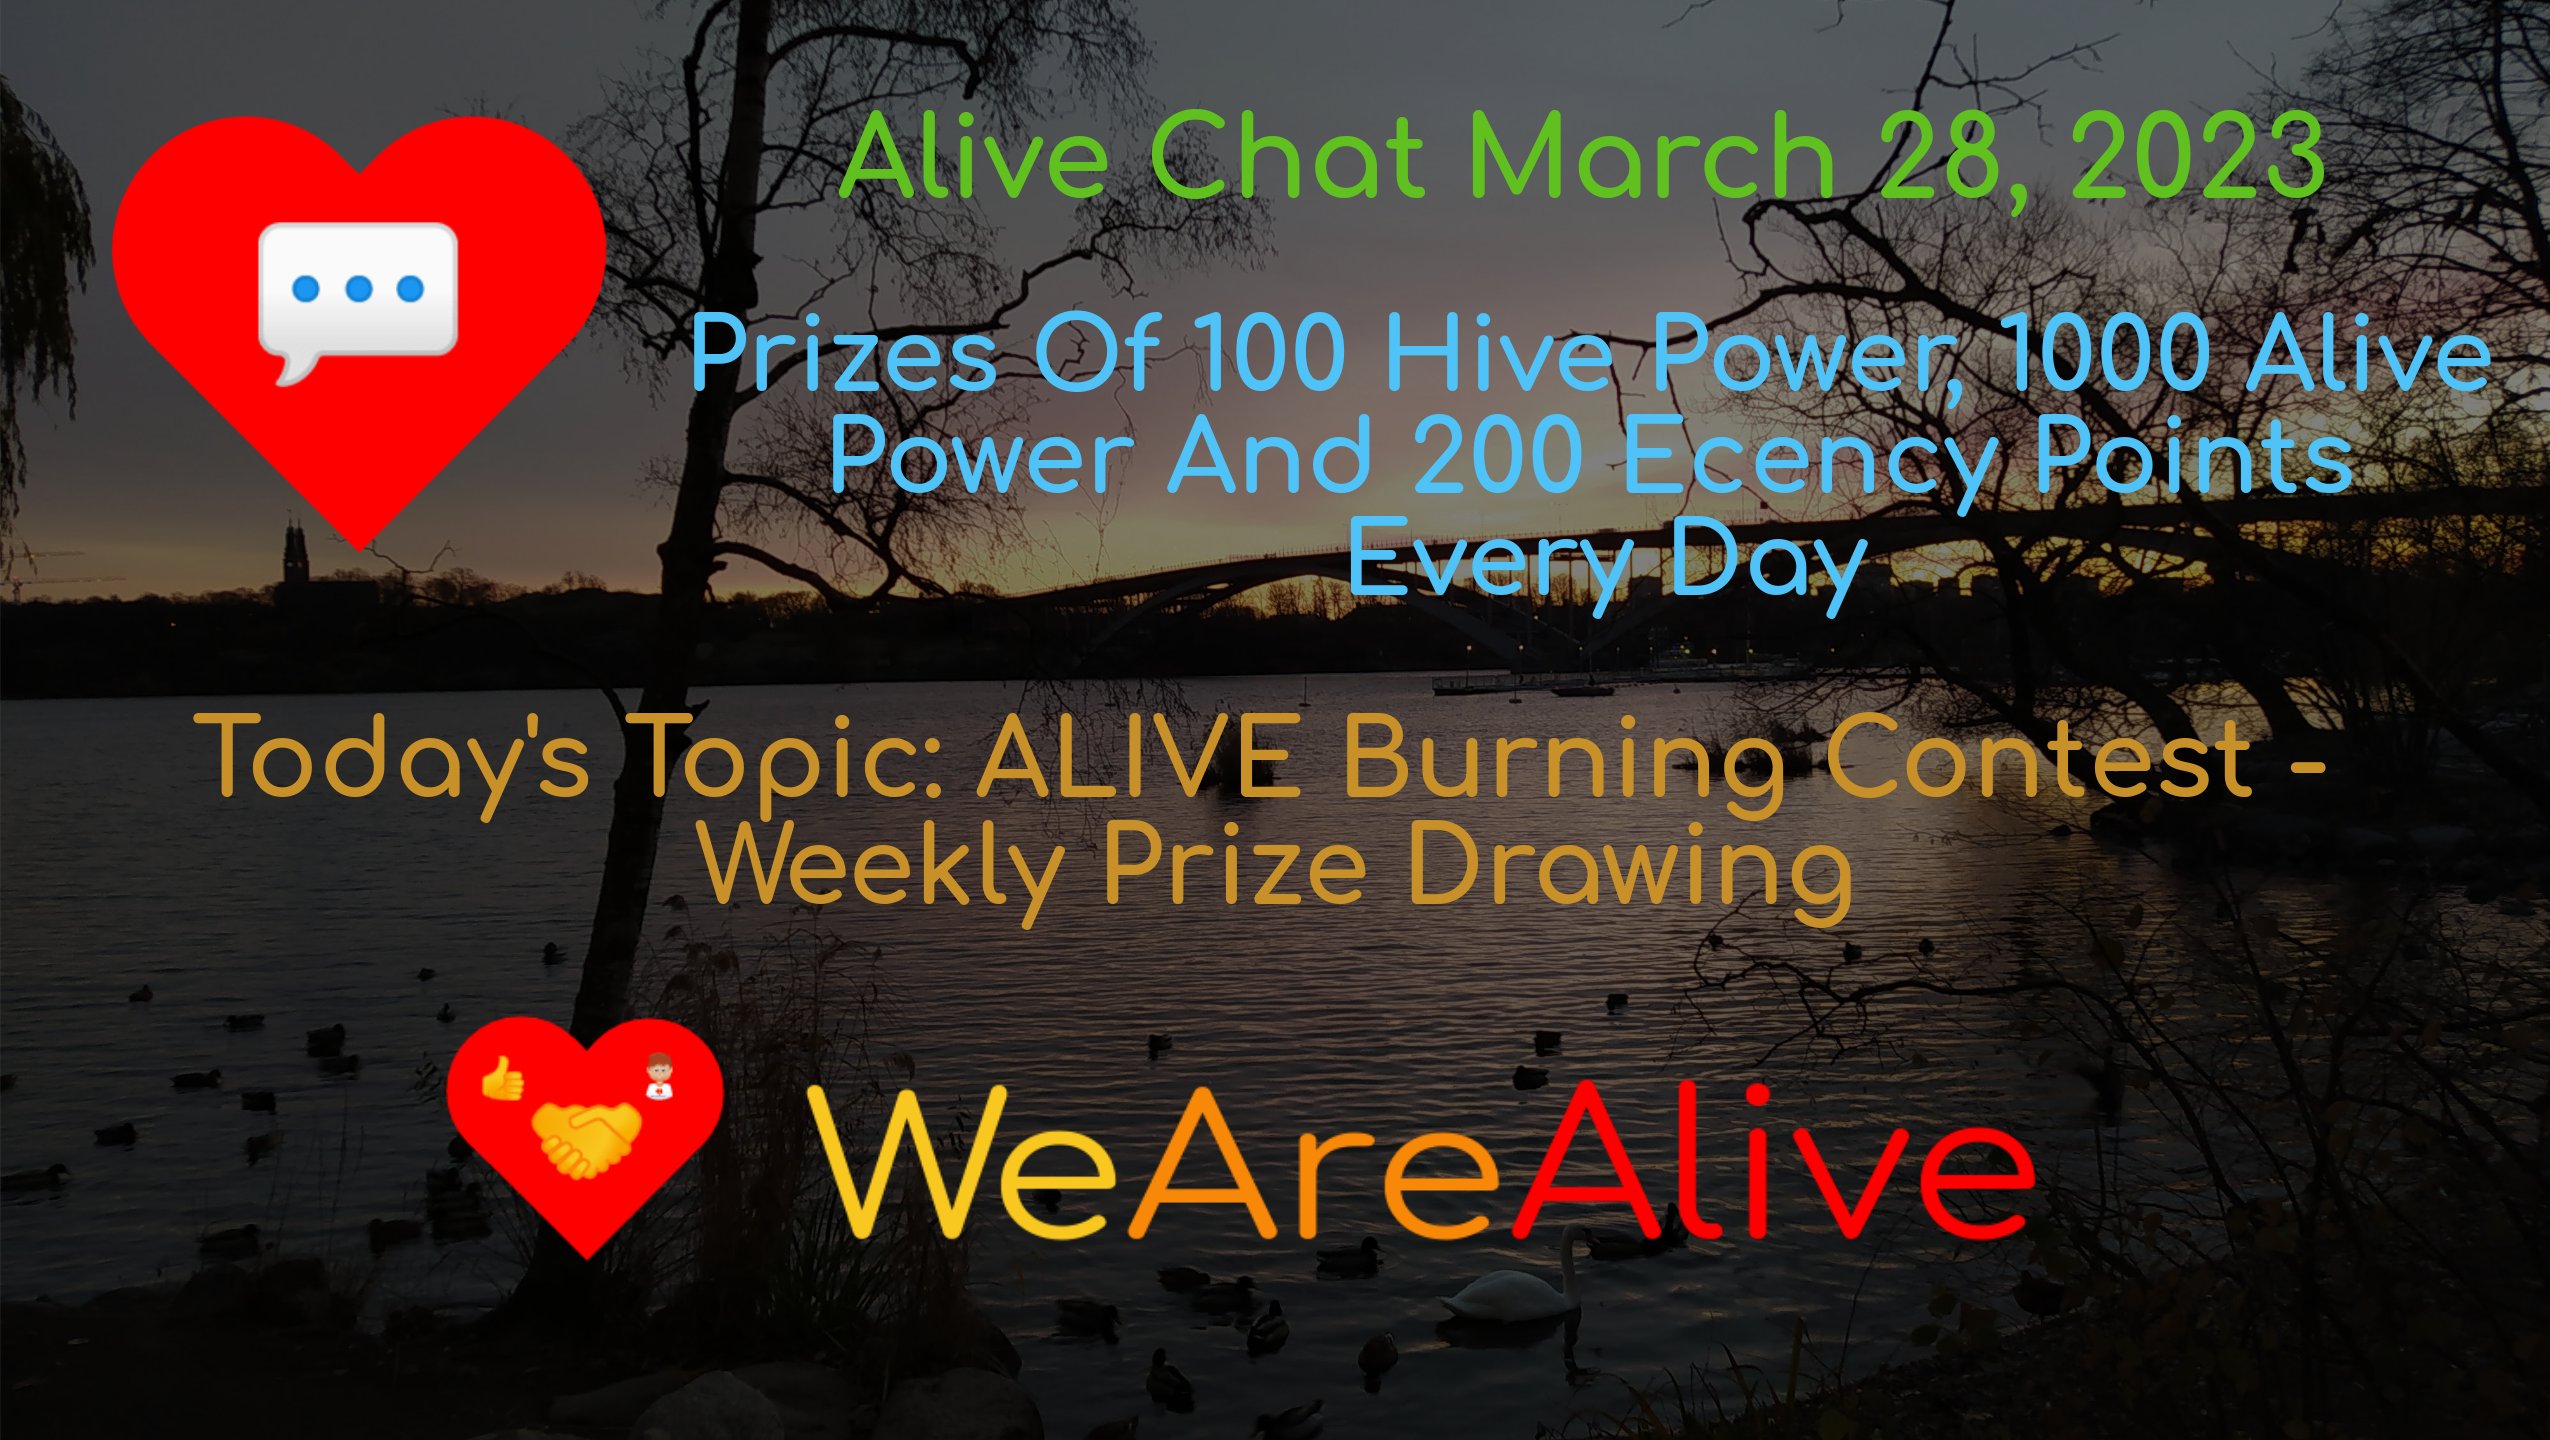 @alive.chat/alive-chat-march-28-2023